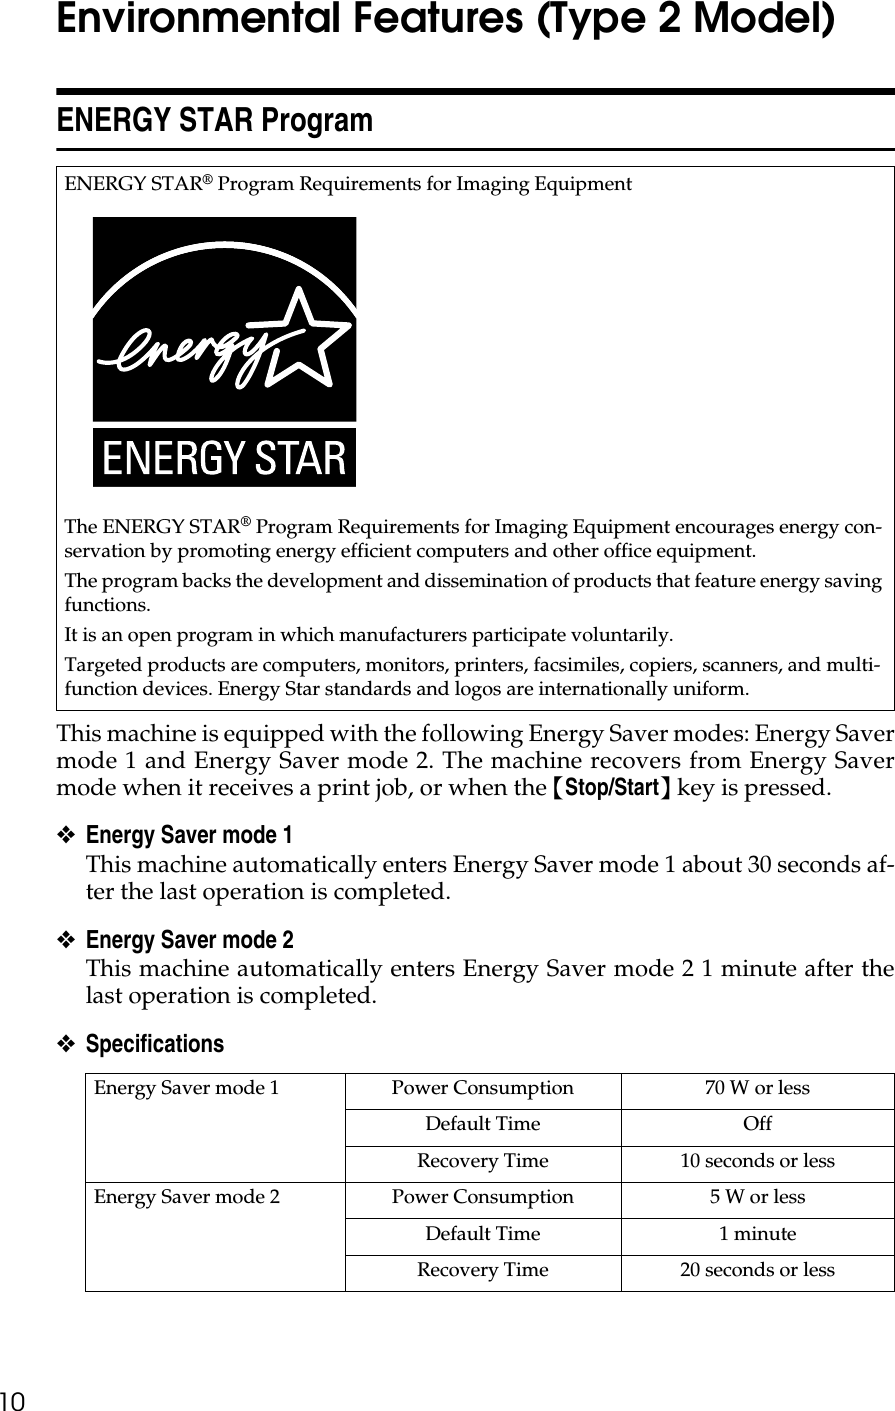 10Environmental Features (Type 2 Model)ENERGY STAR ProgramThis machine is equipped with the following Energy Saver modes: Energy Savermode 1 and Energy Saver mode 2. The machine recovers from Energy Savermode when it receives a print job, or when the {Stop/Start} key is pressed.❖Energy Saver mode 1This machine automatically enters Energy Saver mode 1 about 30 seconds af-ter the last operation is completed.❖Energy Saver mode 2This machine automatically enters Energy Saver mode 2 1 minute after thelast operation is completed.❖Specifications ENERGY STAR® Program Requirements for Imaging EquipmentThe ENERGY STAR® Program Requirements for Imaging Equipment encourages energy con-servation by promoting energy efficient computers and other office equipment.The program backs the development and dissemination of products that feature energy saving functions.It is an open program in which manufacturers participate voluntarily.Targeted products are computers, monitors, printers, facsimiles, copiers, scanners, and multi-function devices. Energy Star standards and logos are internationally uniform.Energy Saver mode 1 Power Consumption 70 W or lessDefault Time OffRecovery Time 10 seconds or lessEnergy Saver mode 2 Power Consumption 5 W or lessDefault Time 1 minuteRecovery Time 20 seconds or less